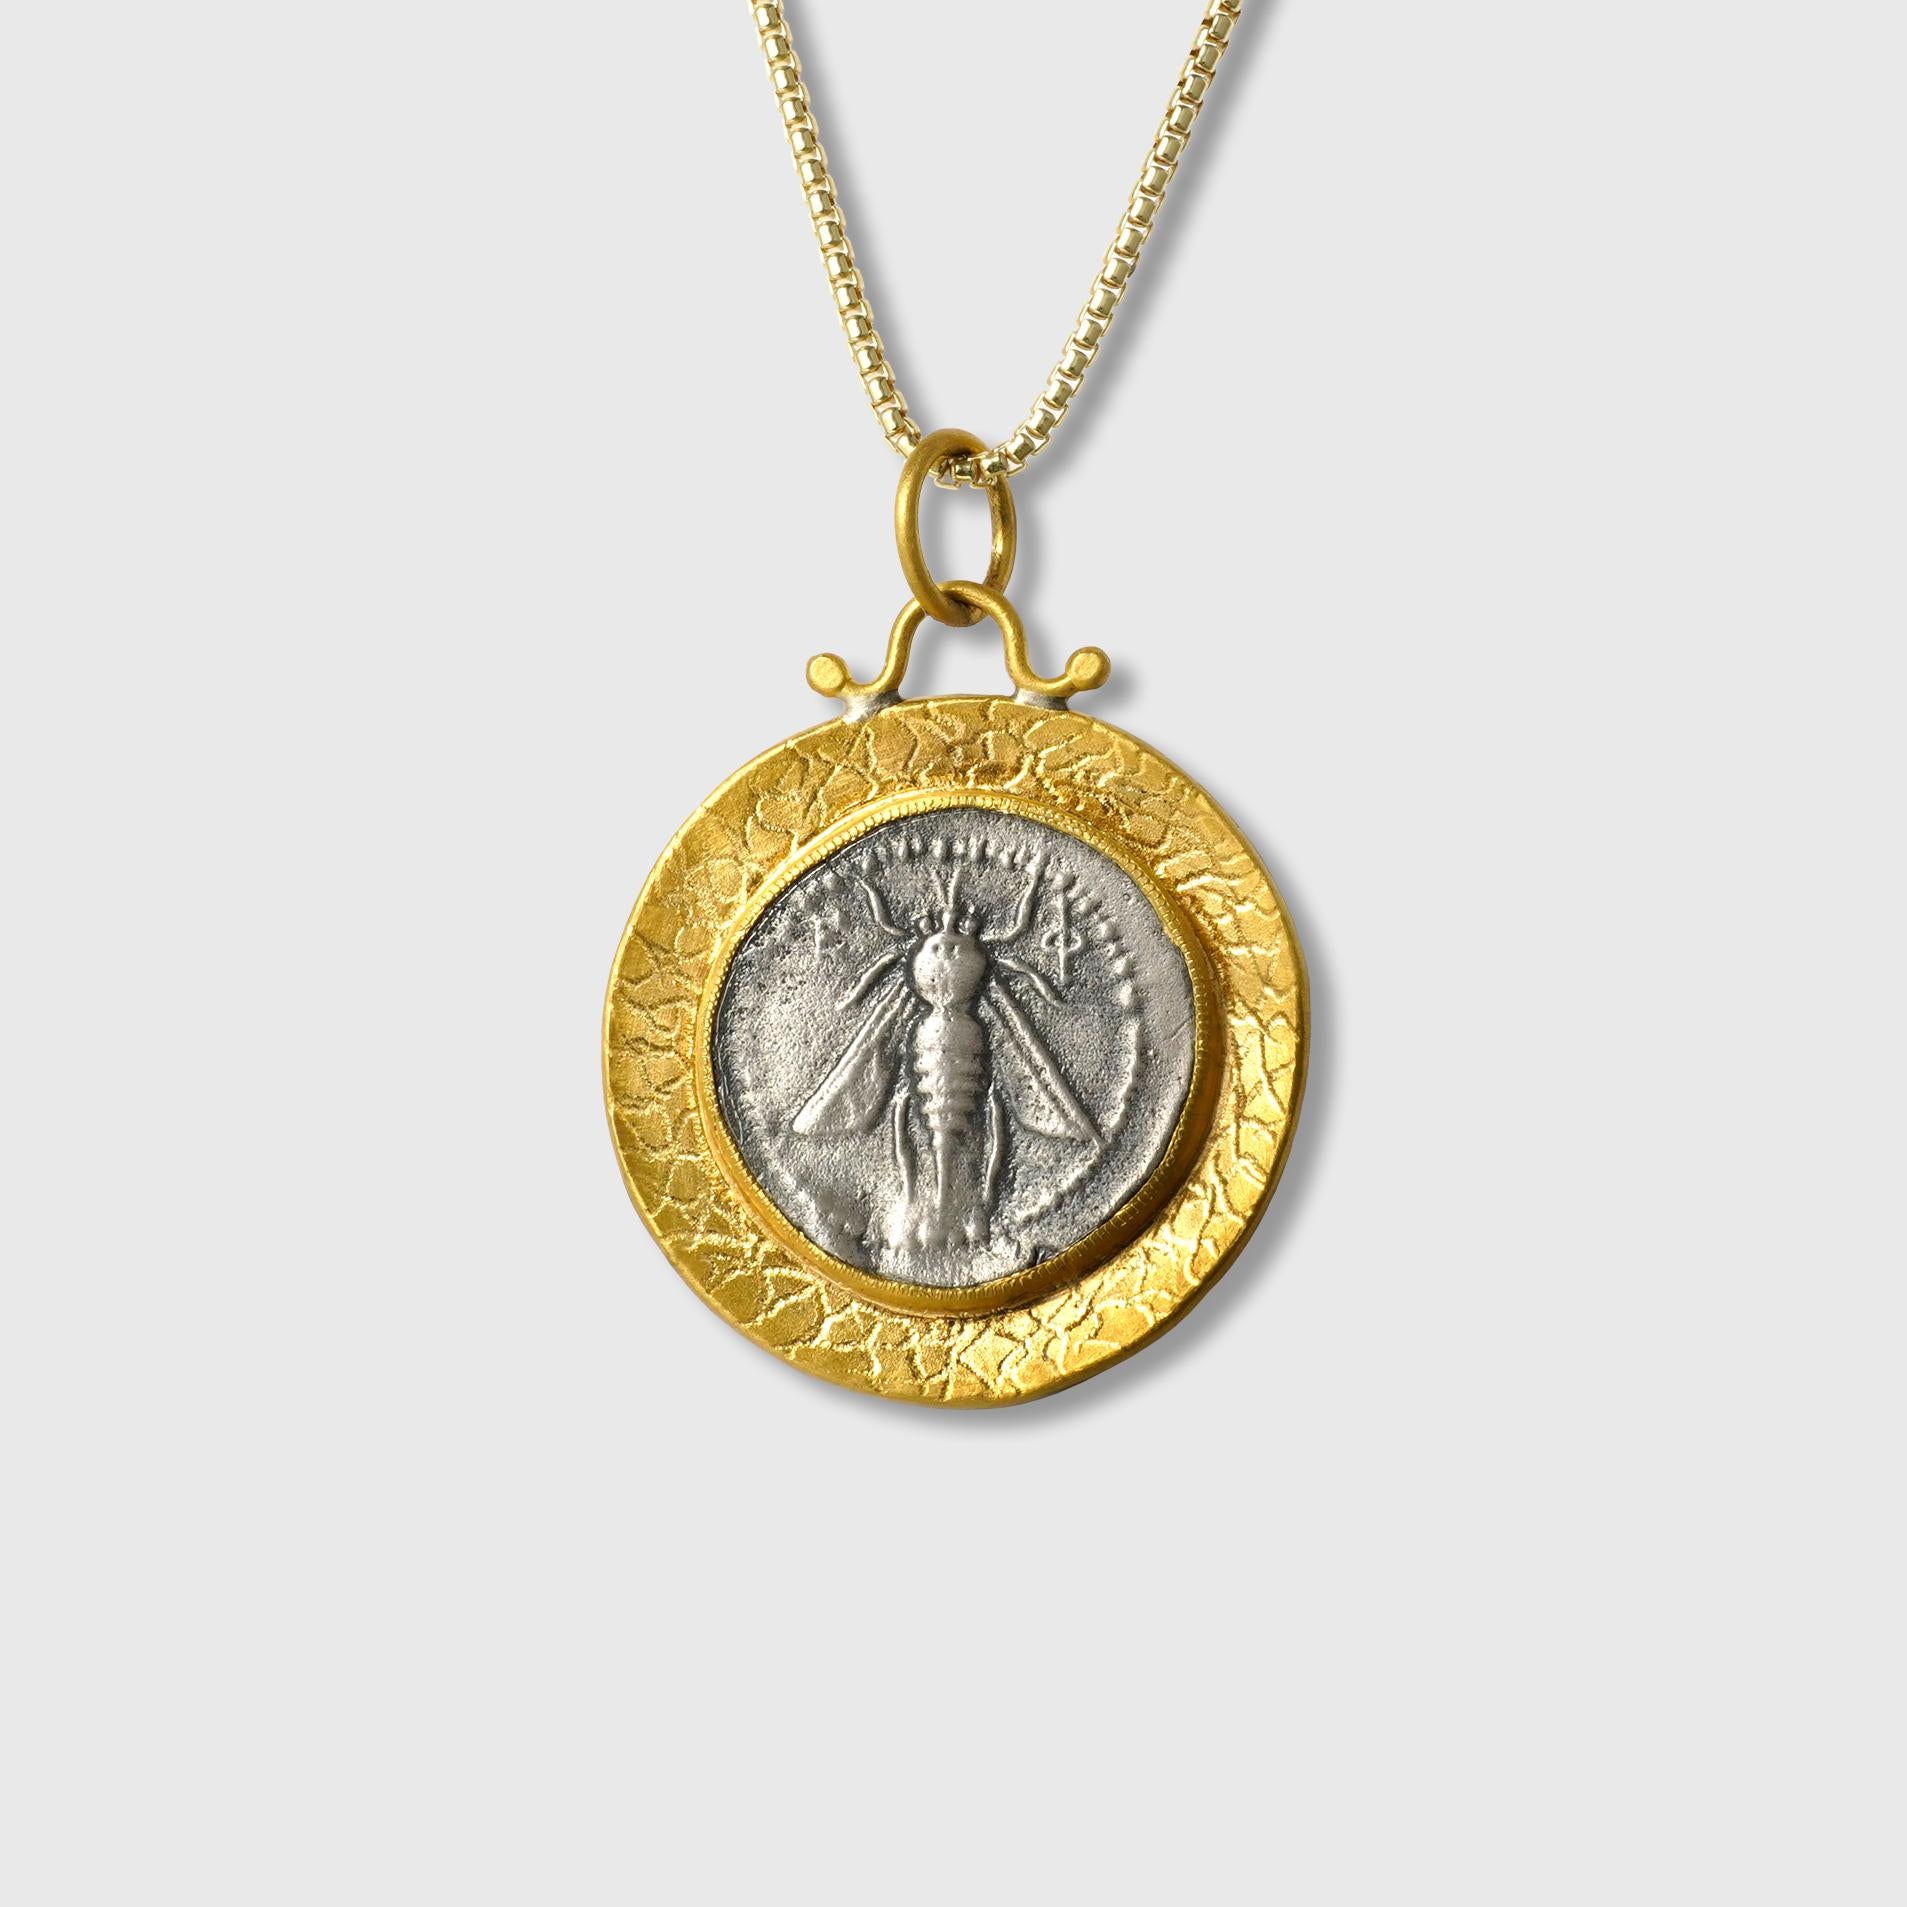 Large, Gold-Framed, Ancient, Ephesus, Queen Bee, Tetra Drachm, Coin (Replica) Charm Pendant, 24kt Gold and Silver

Sterling Silver coin is a replica coin from those in the Turkish Museum. 390–380 B.C., Coin (tetradrachm) of Ephesos

24kt Gold-1.92